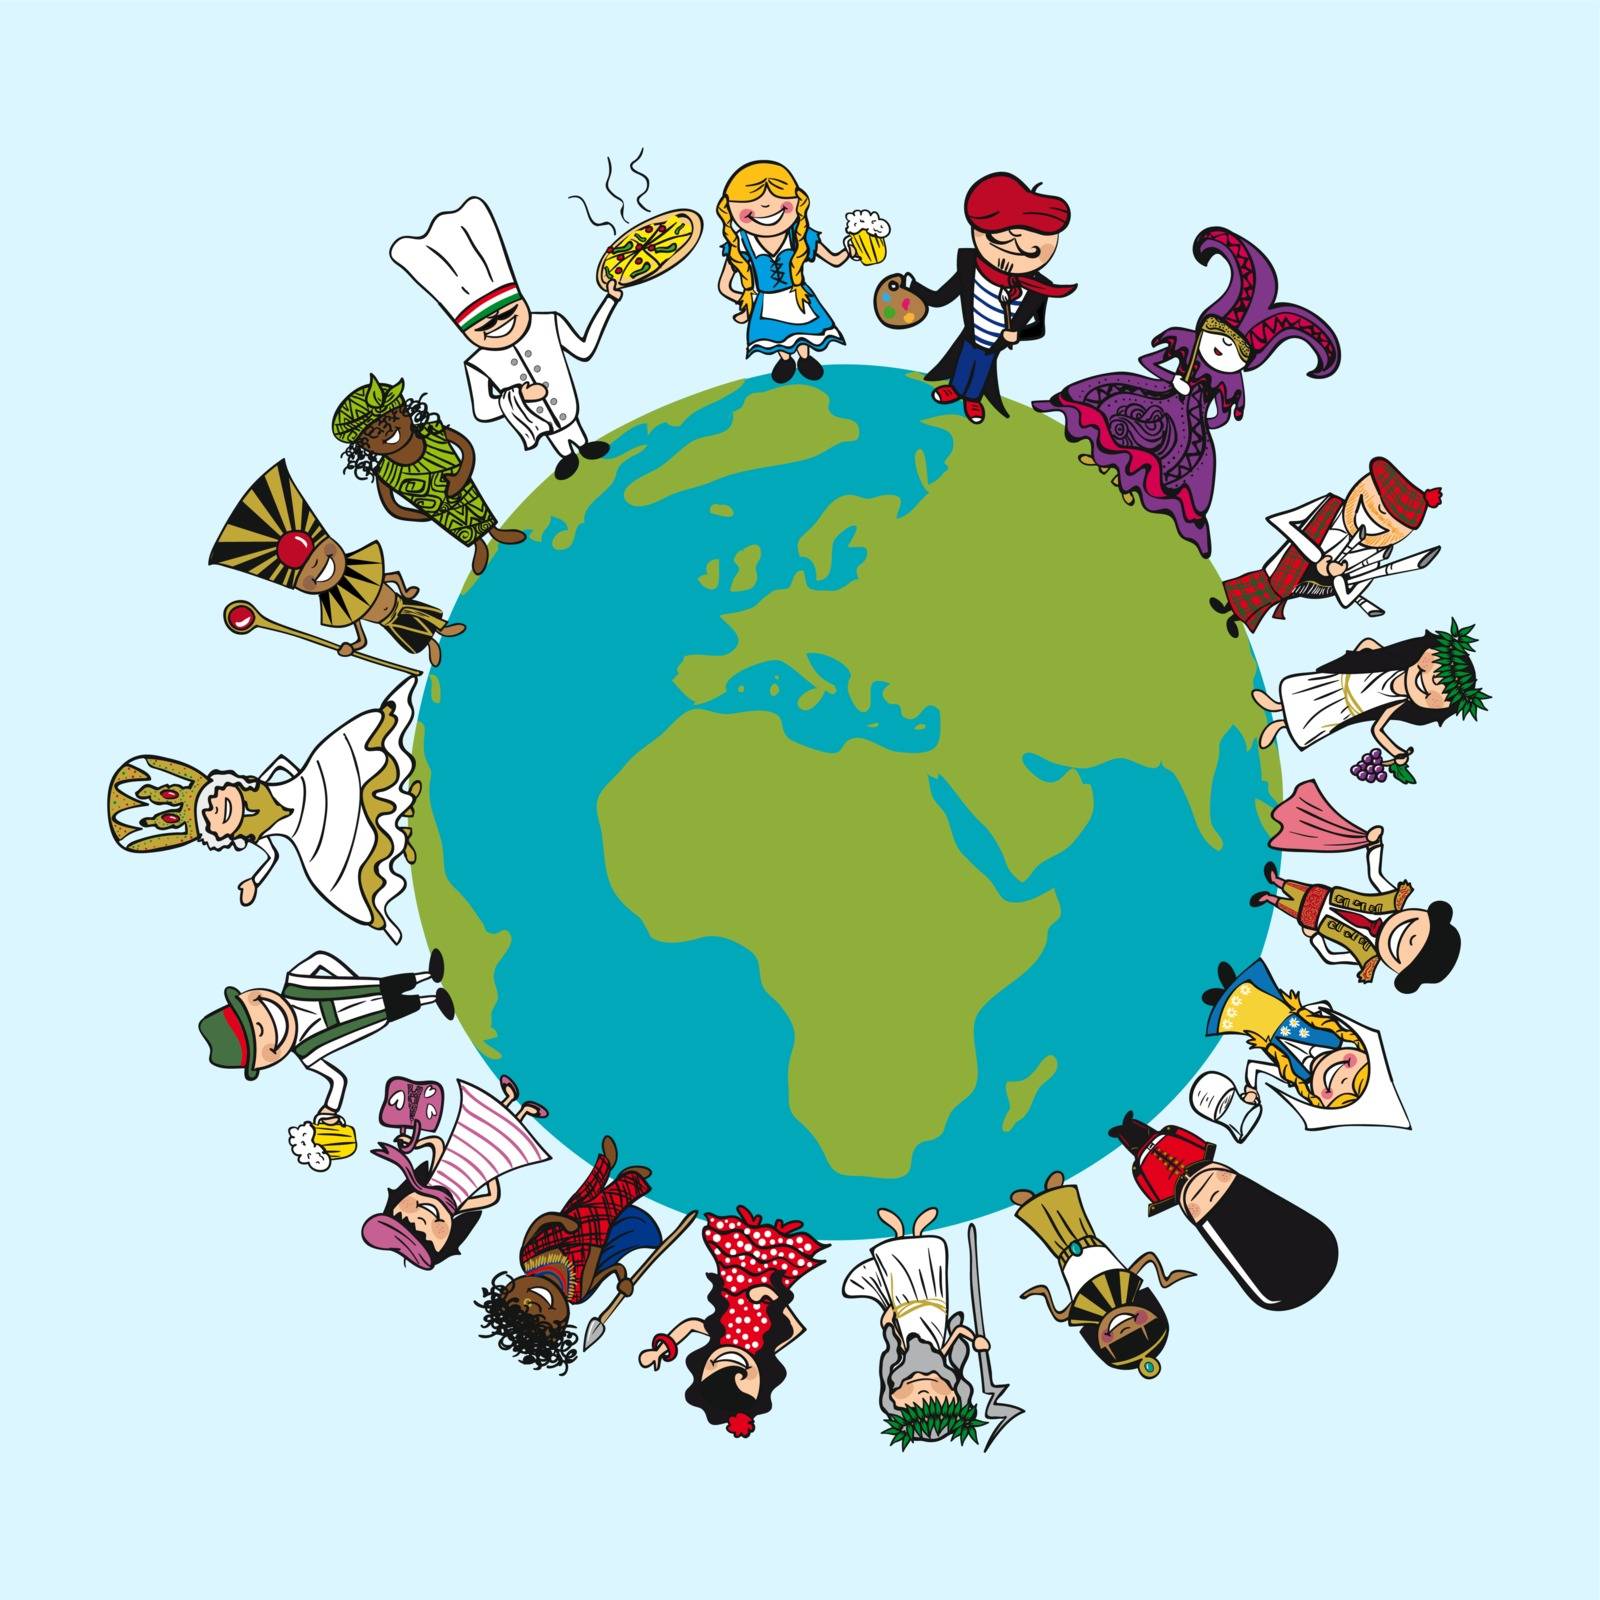 World map, diversity people cartoons with distinctive outfit concept illustration. Vector file layered for easy editing.
